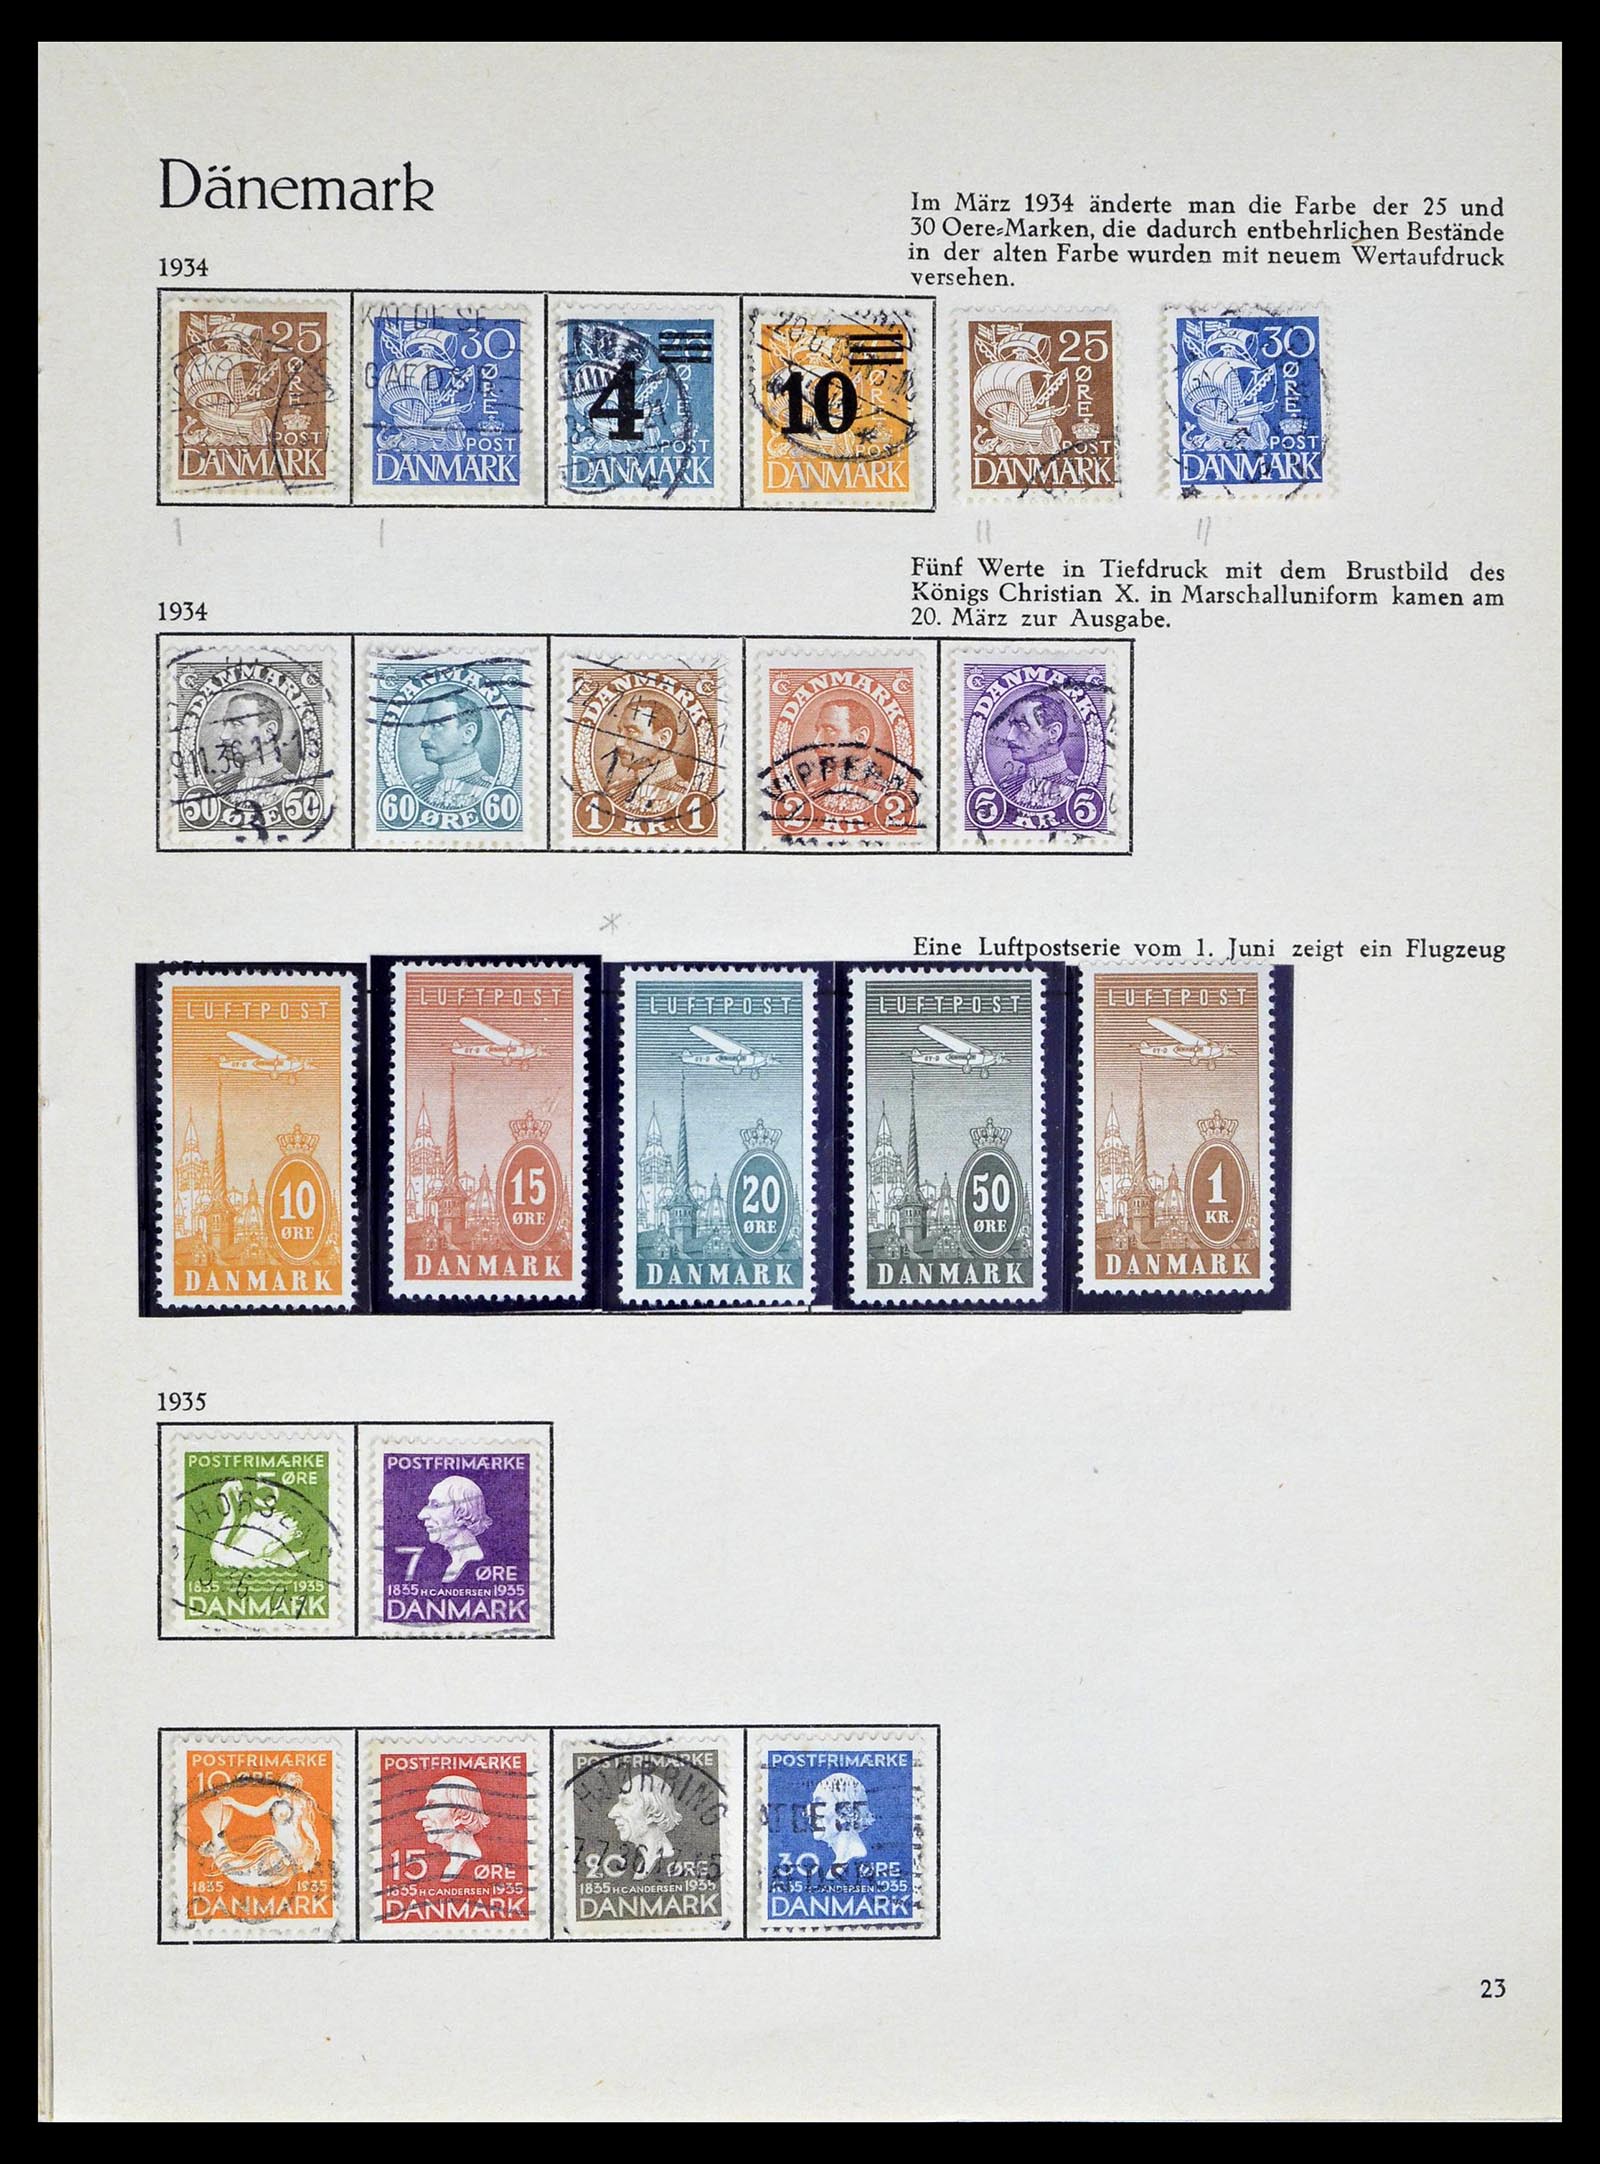 39407 0011 - Stamp collection 39407 Denmark 1851-1969.